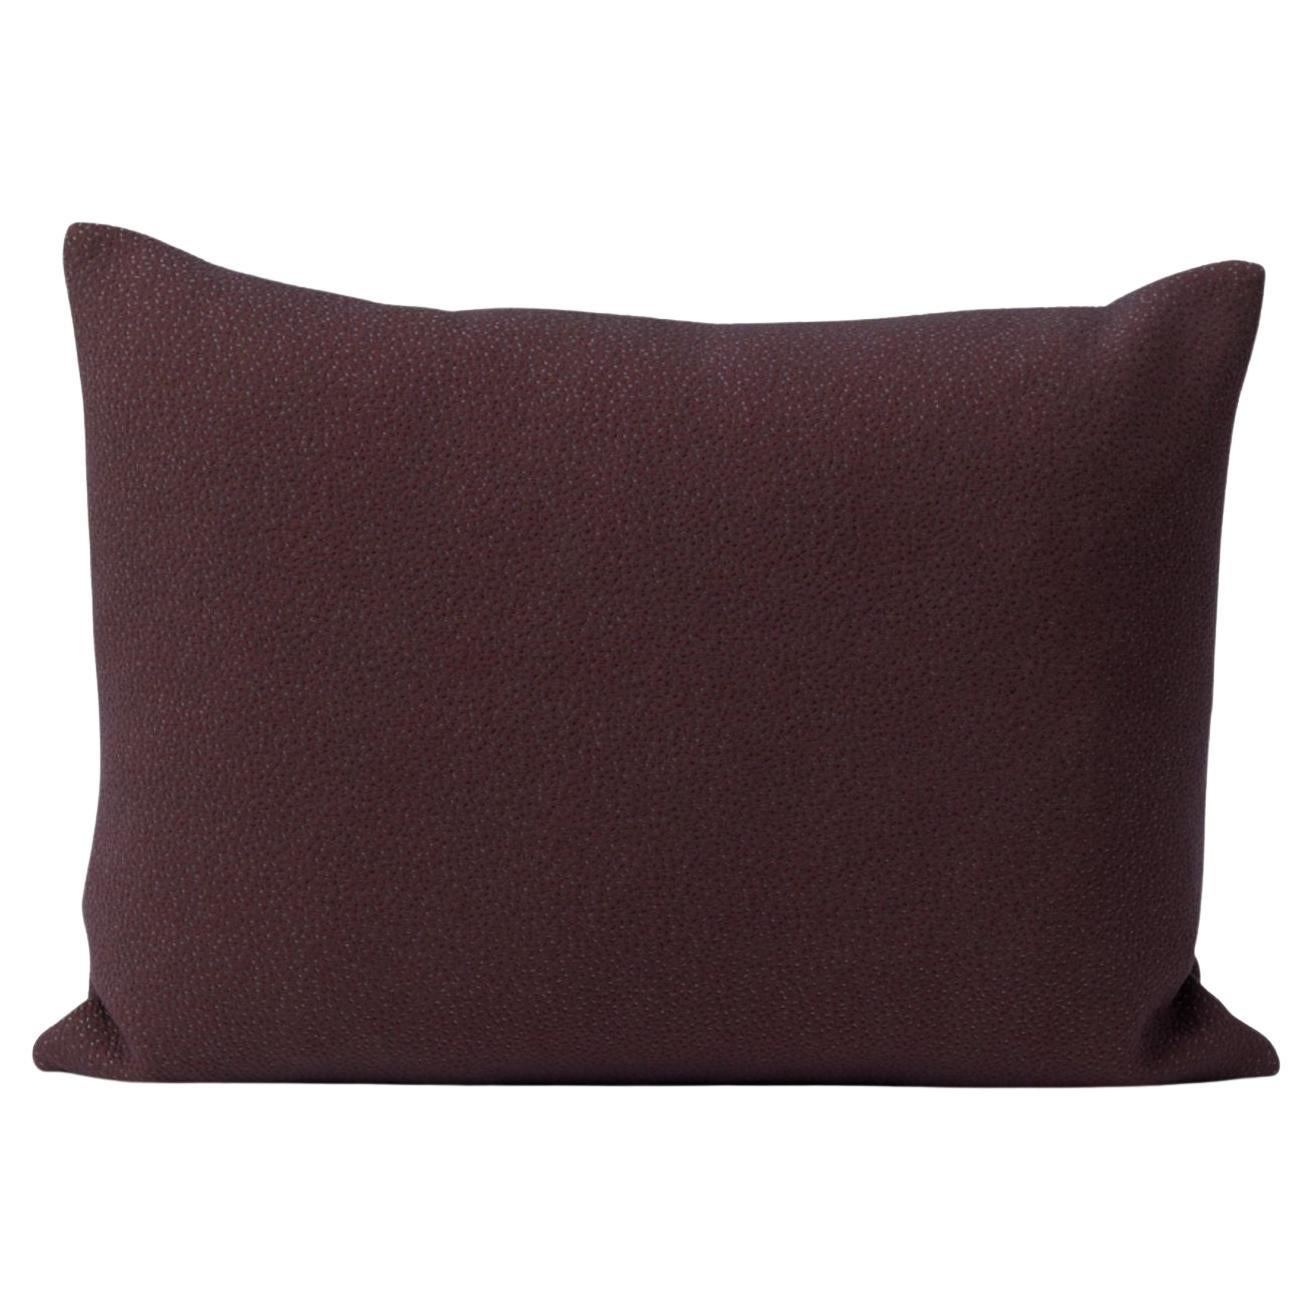 Galore Cushion Square Sprinkles Eggplant by Warm Nordic For Sale